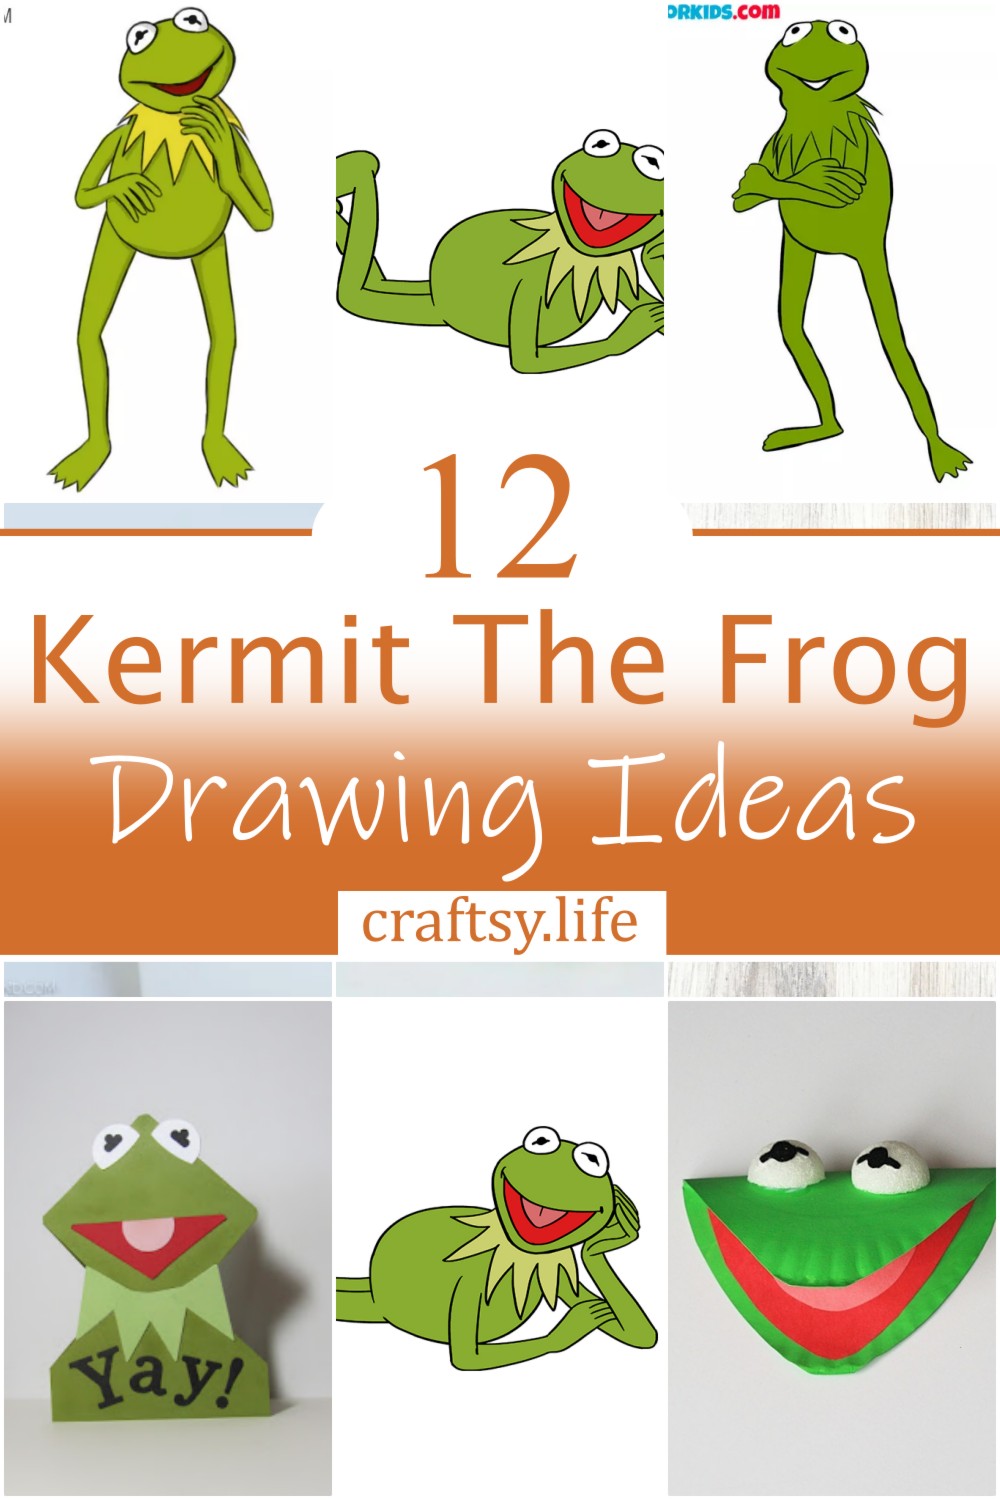 Kermit The Frog Drawing Ideas